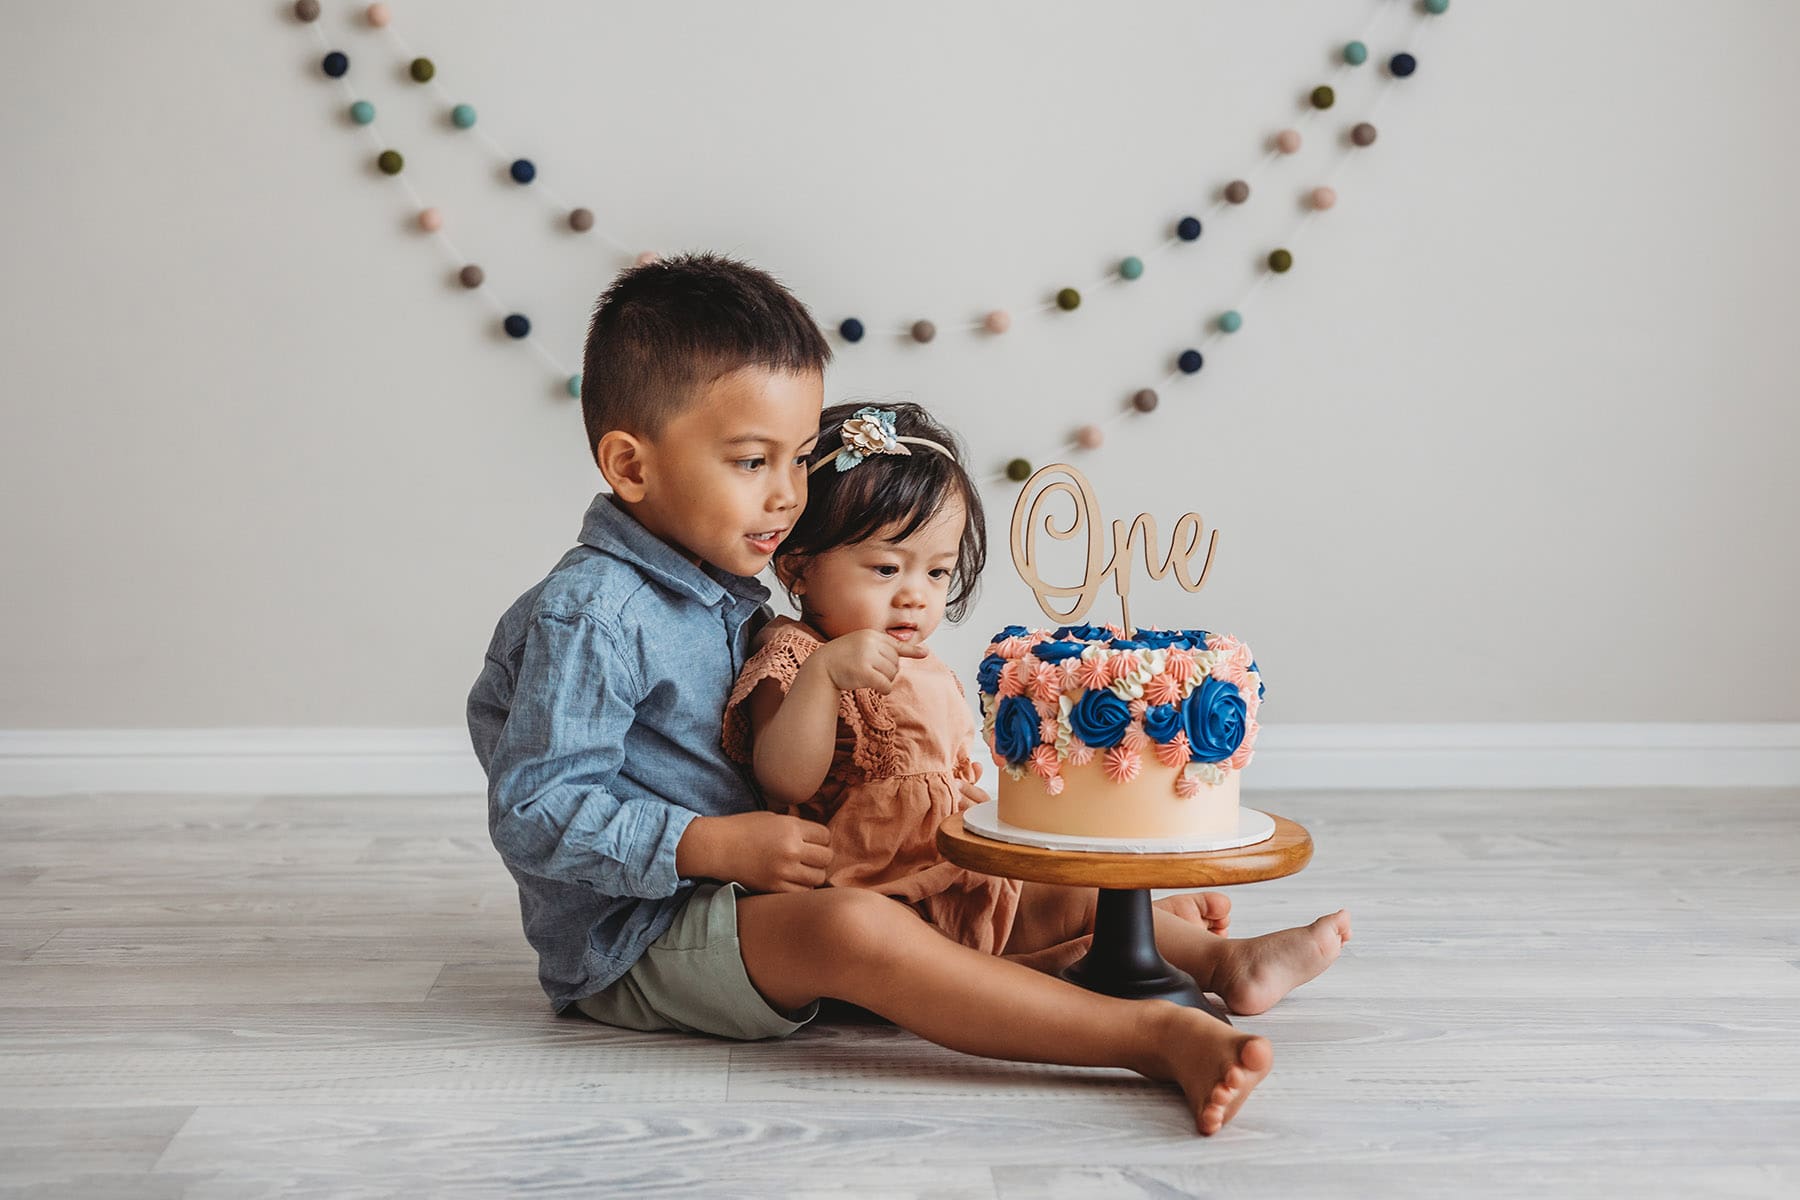 A baby girl sits with her big brother in front of a colourful cake she's about to smash for her first birthday